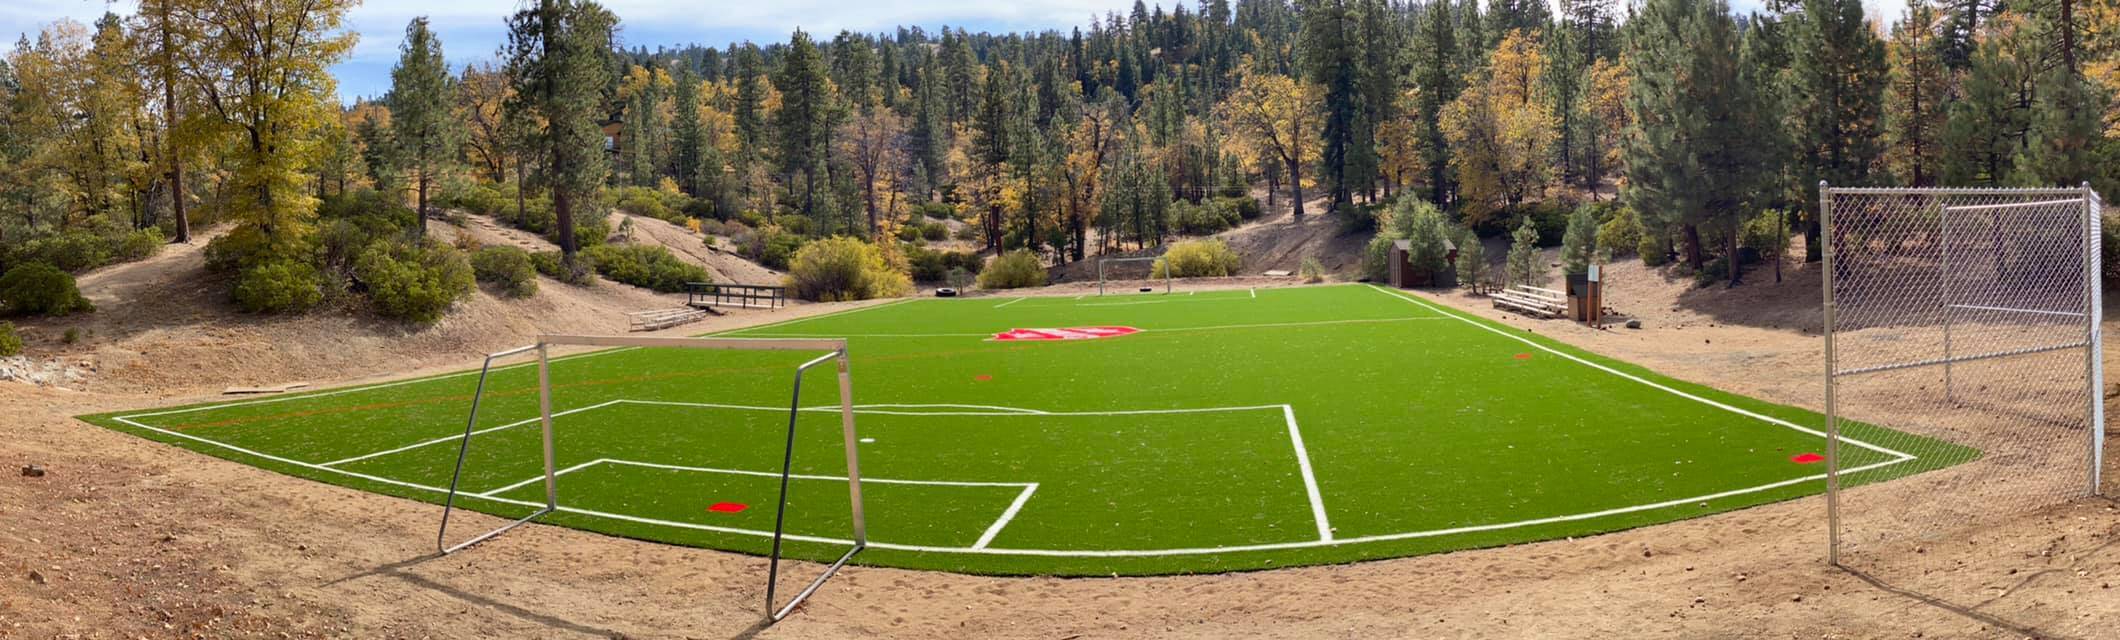 Sports Turf, Athletic Fields Artificial Grass, for lawns, gyms sports fields, Inland Empire